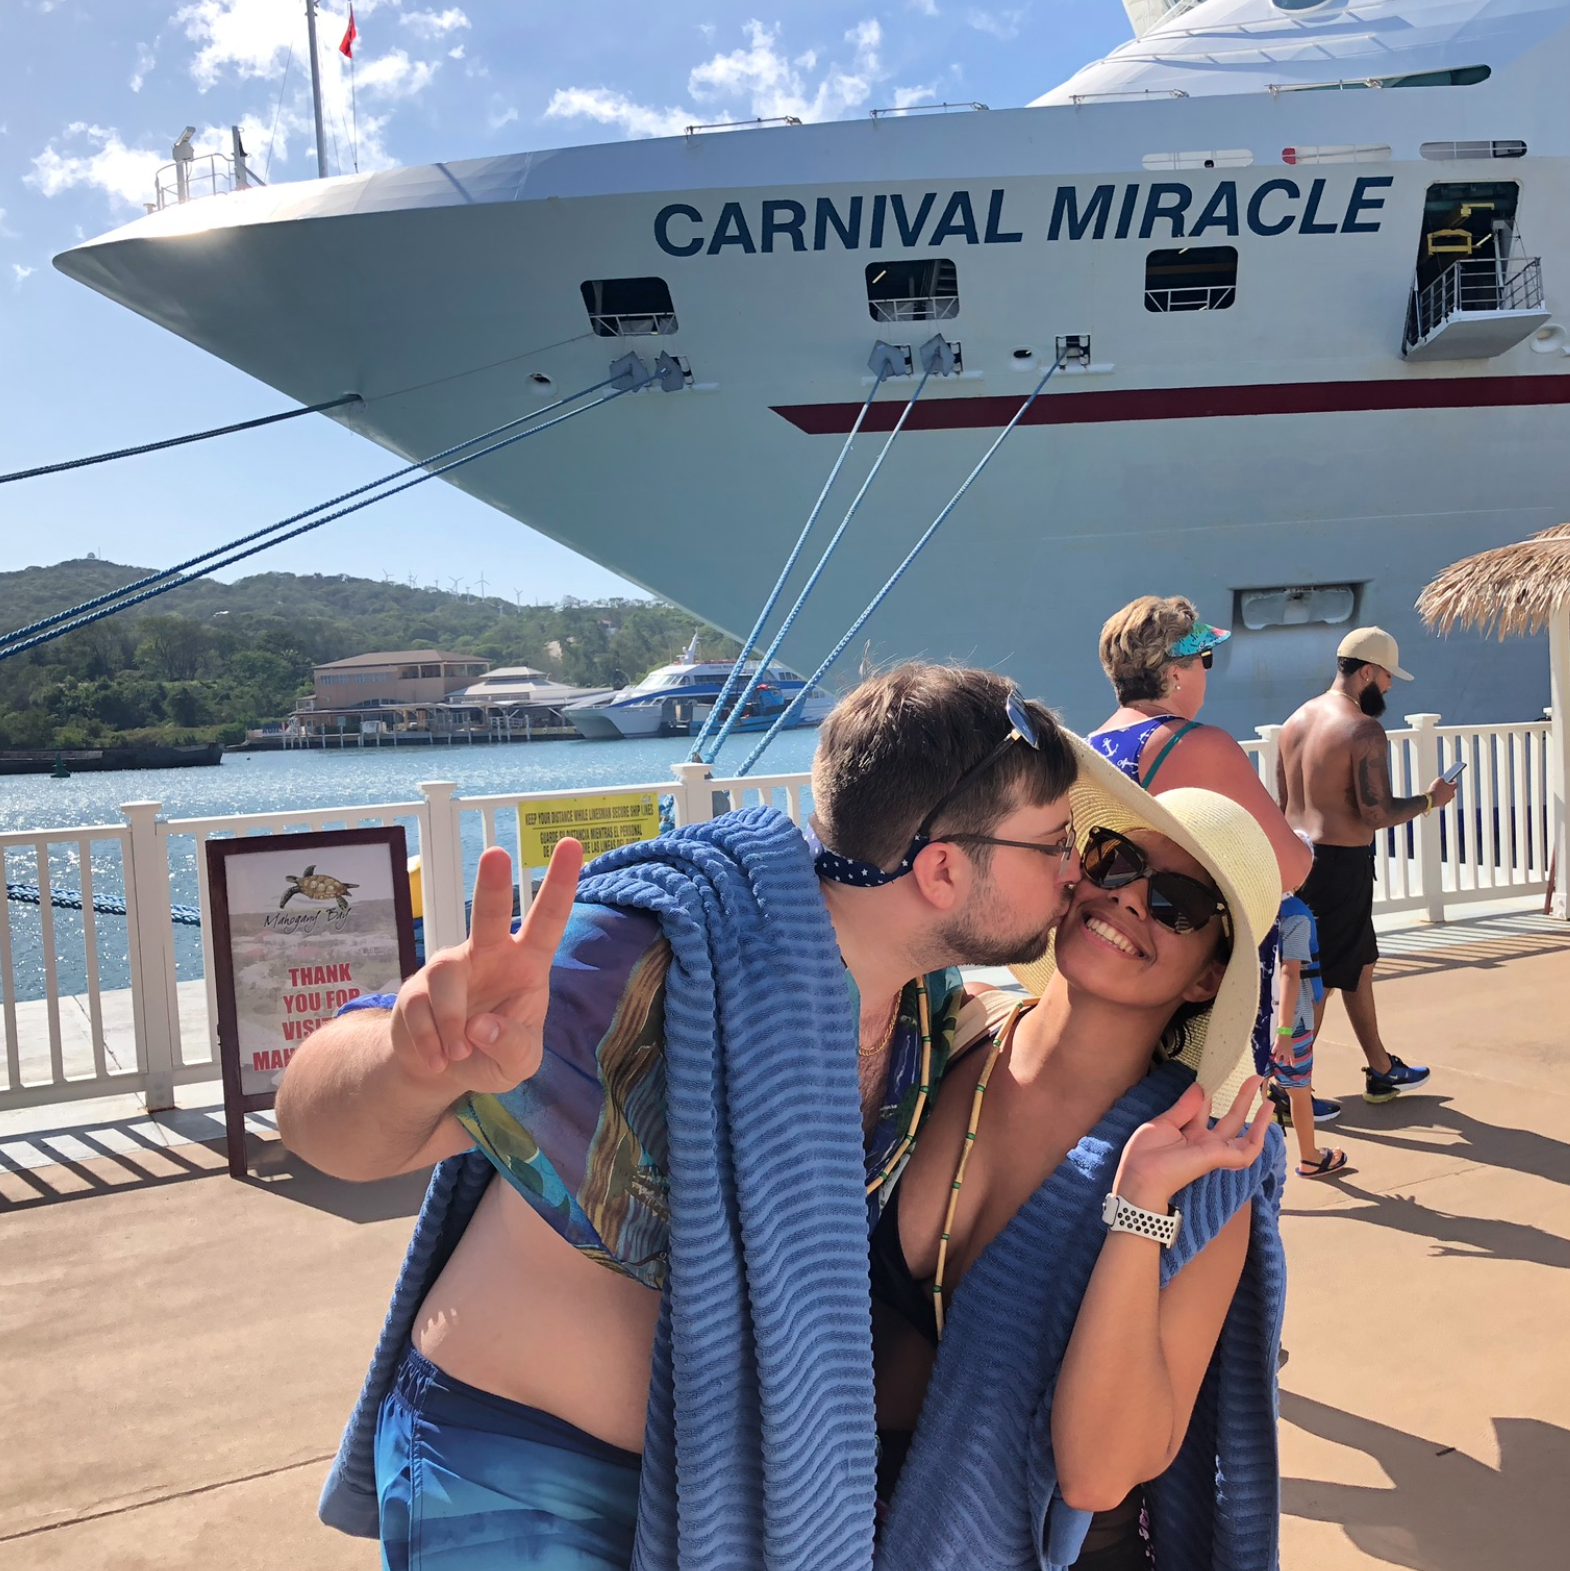 The Carnival miracle was the ship that started the family's love for cruising